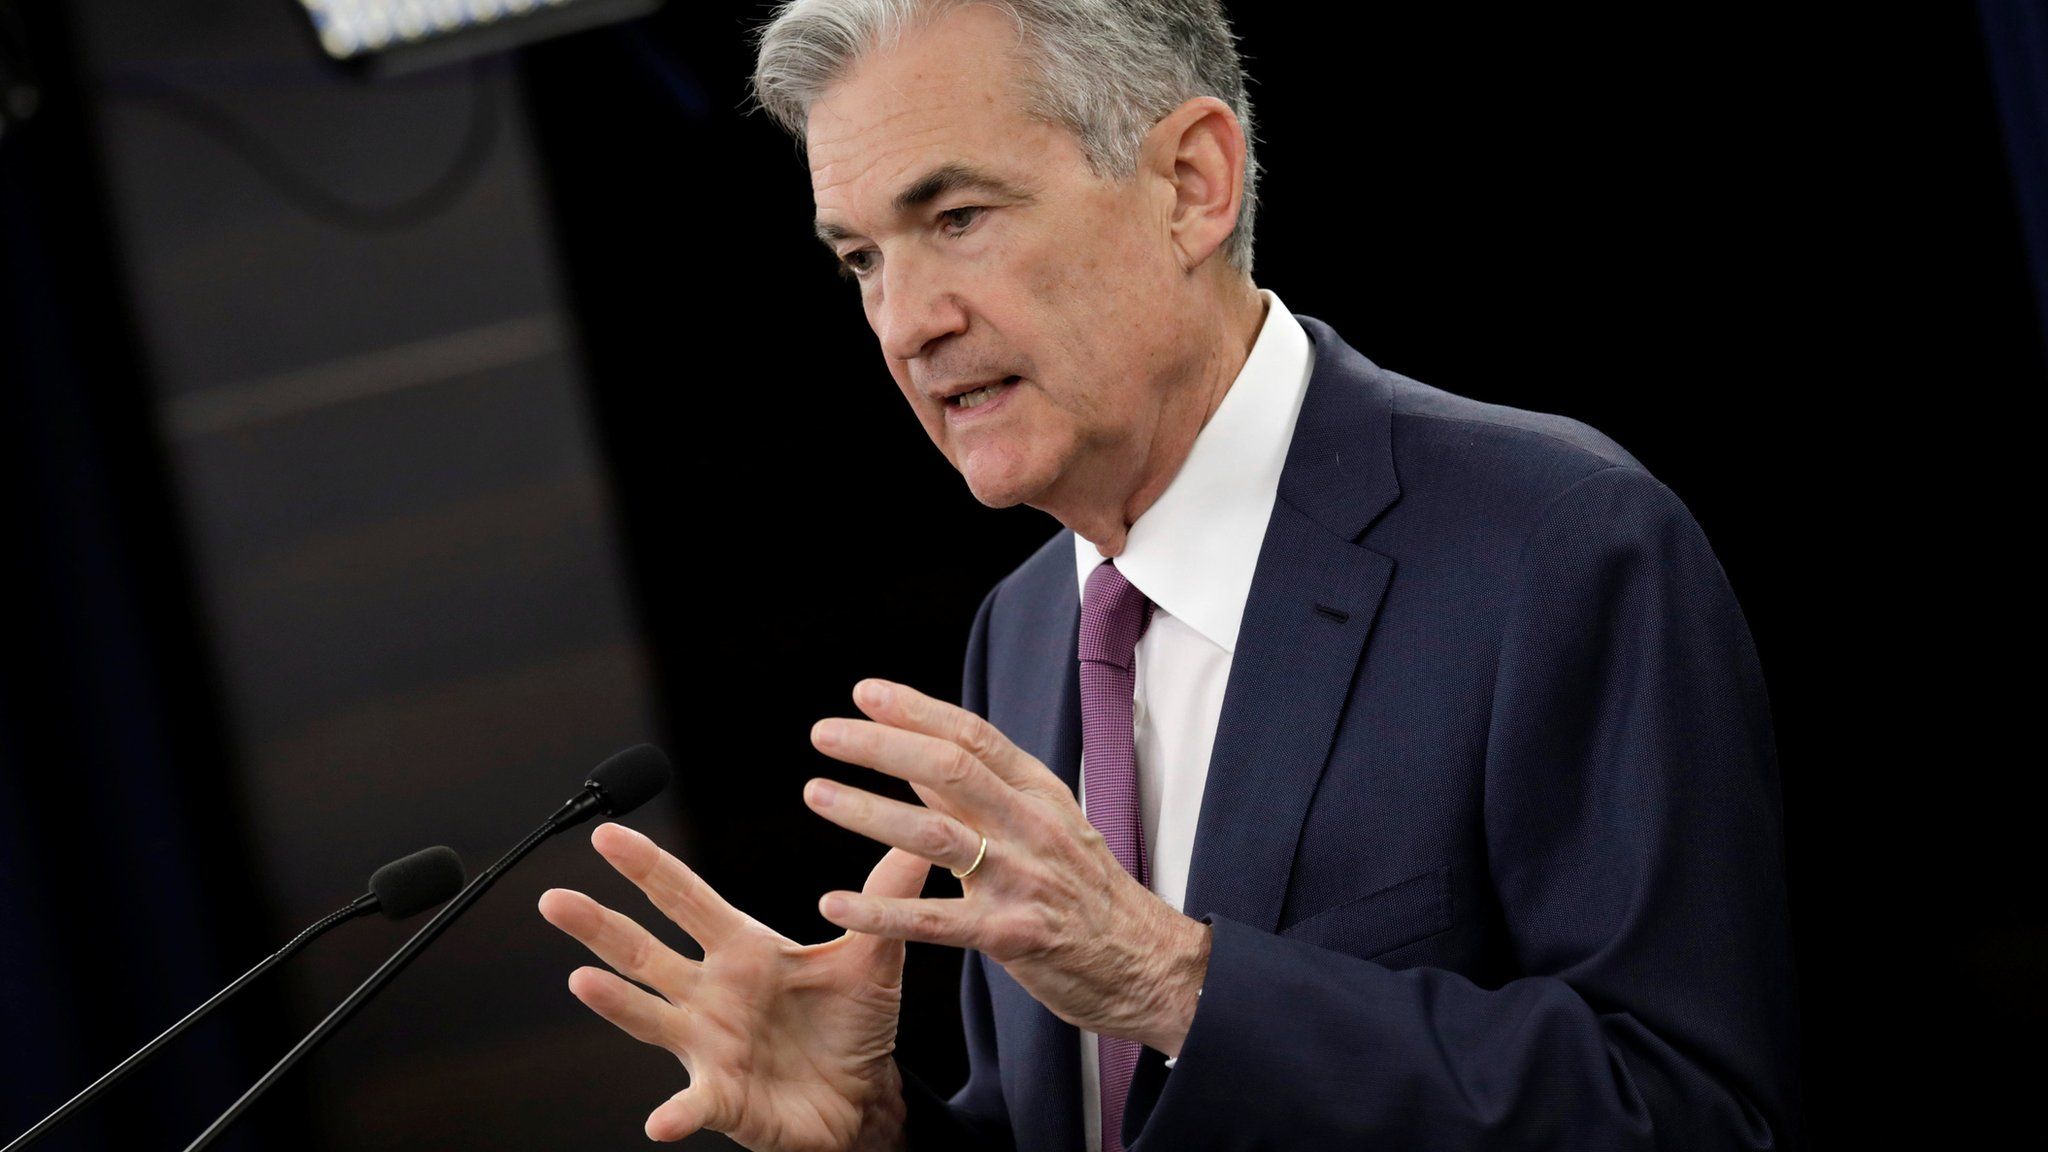 Federal Reserve Board Chairman Jerome Powell speaks at his news conference after the two-day meeting of the Federal Open Market Committee (FOMC) on interest rate policy in Washington, U.S., June 13, 2018.